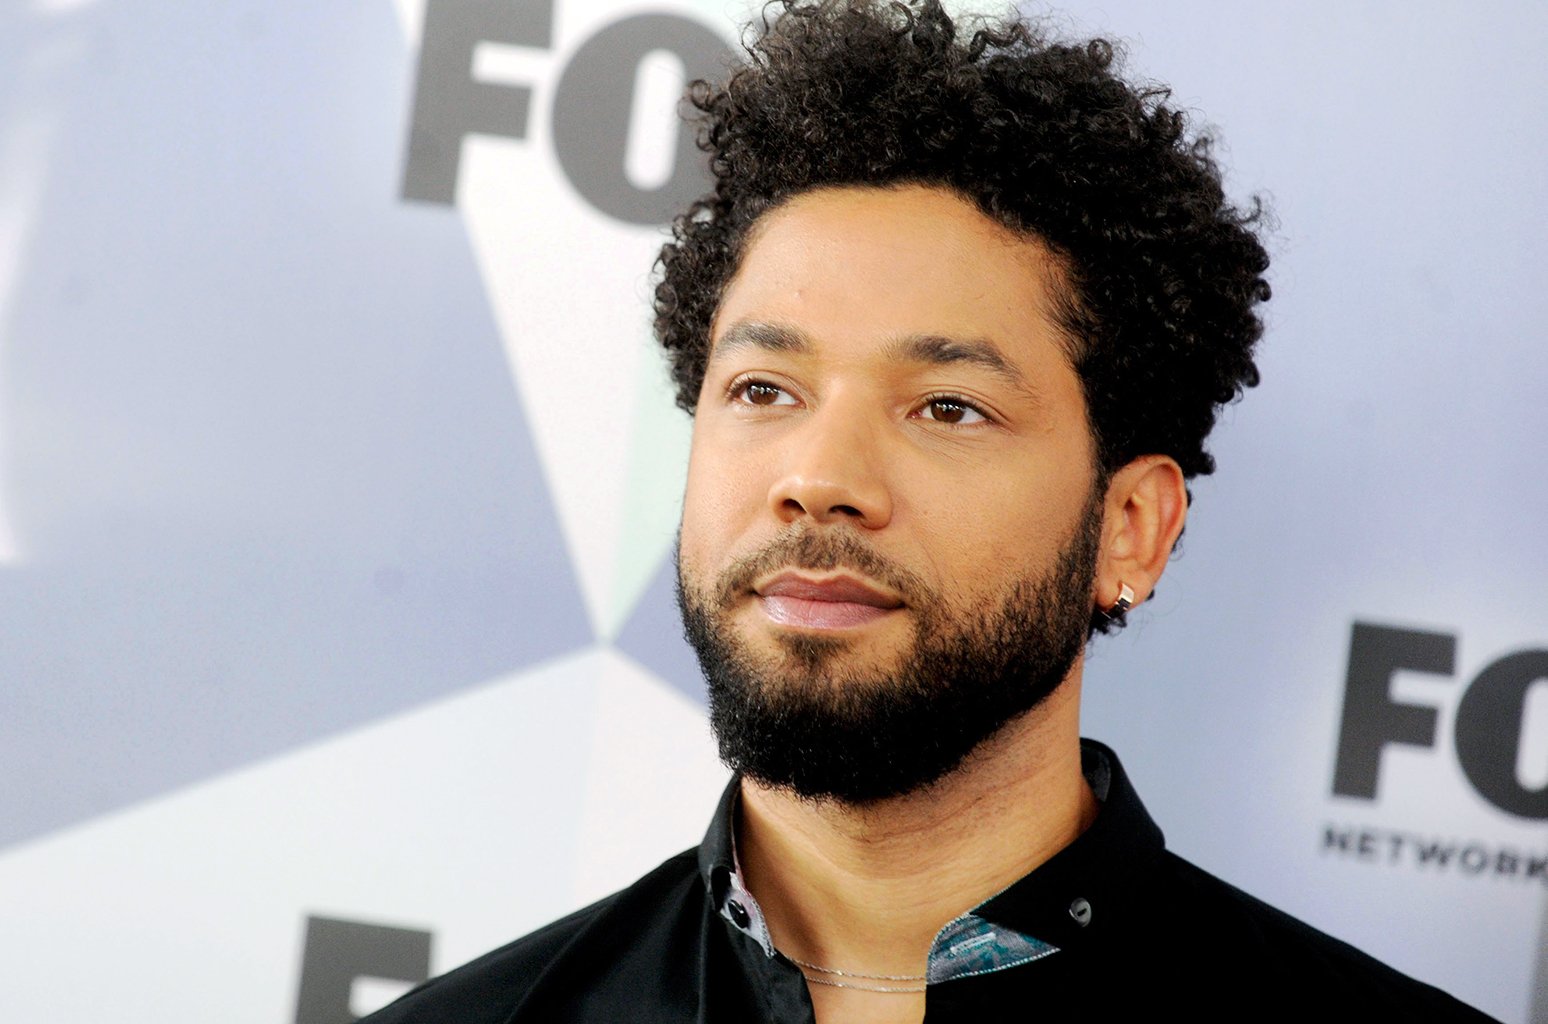 Jussie Smollett accused of staging his attacks